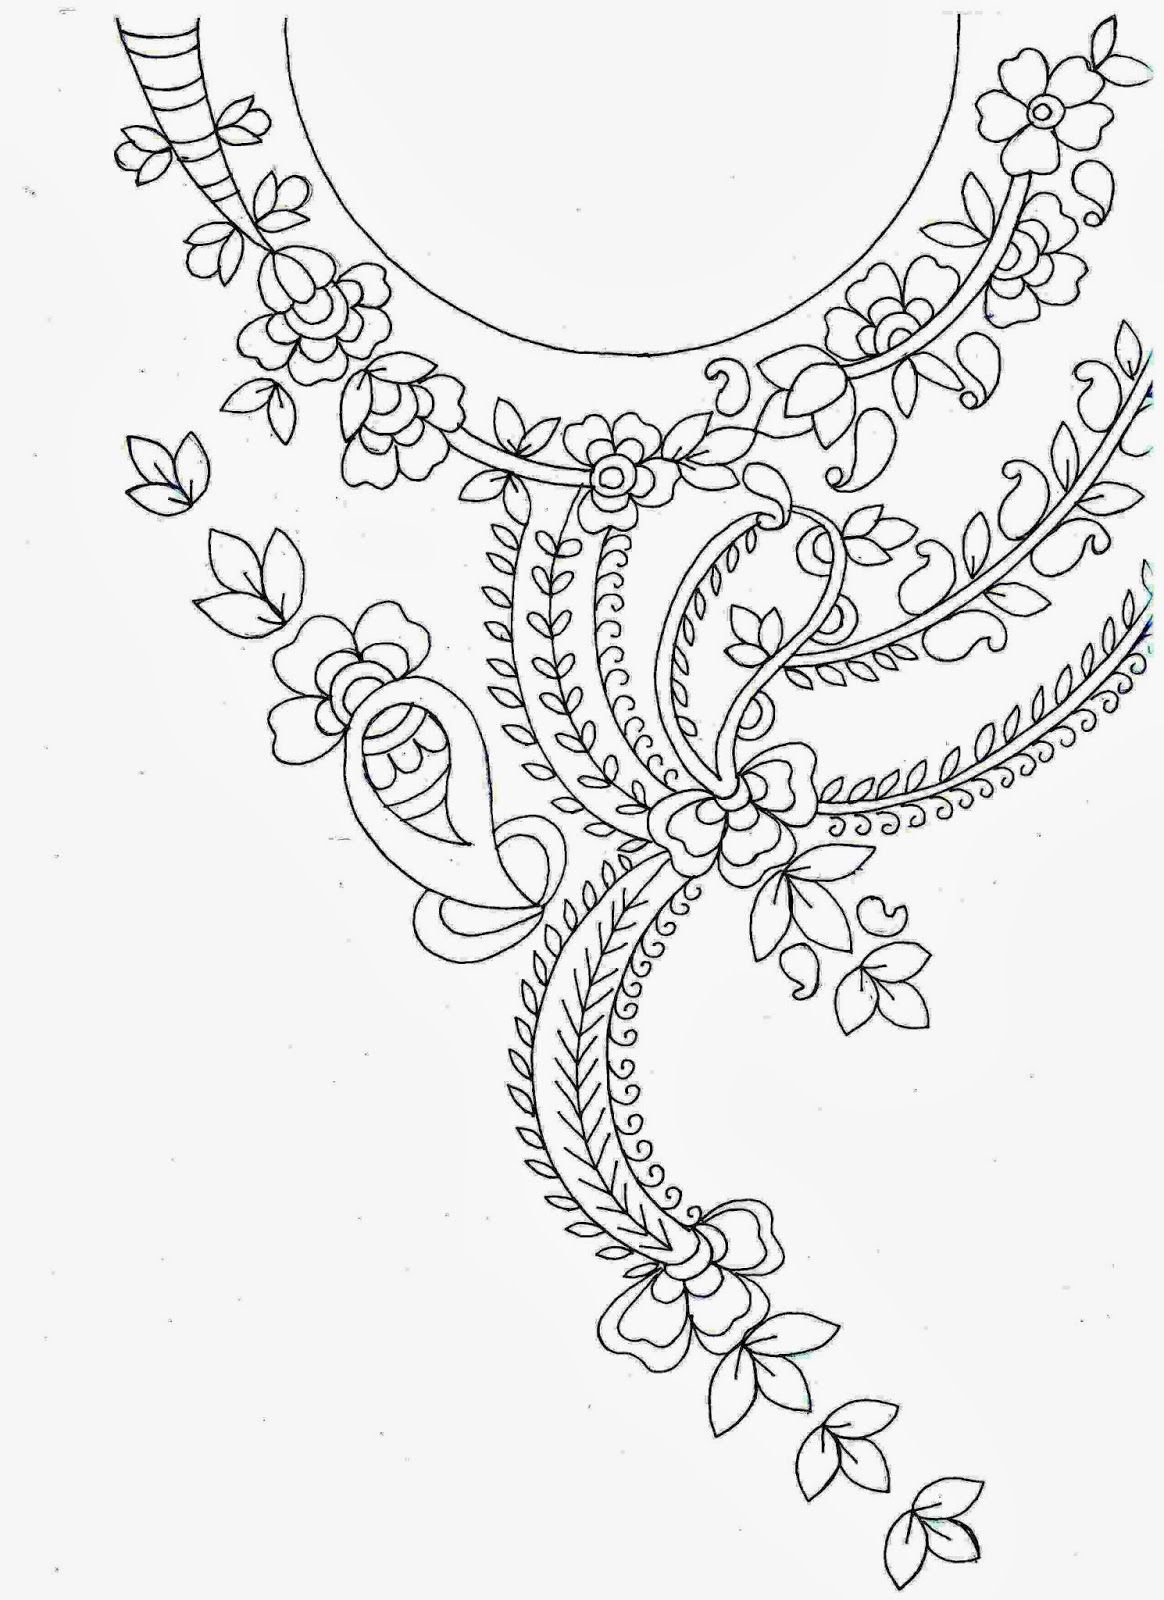 Western Embroidery Patterns Embroidery Paintings Search Result At Paintingvalley